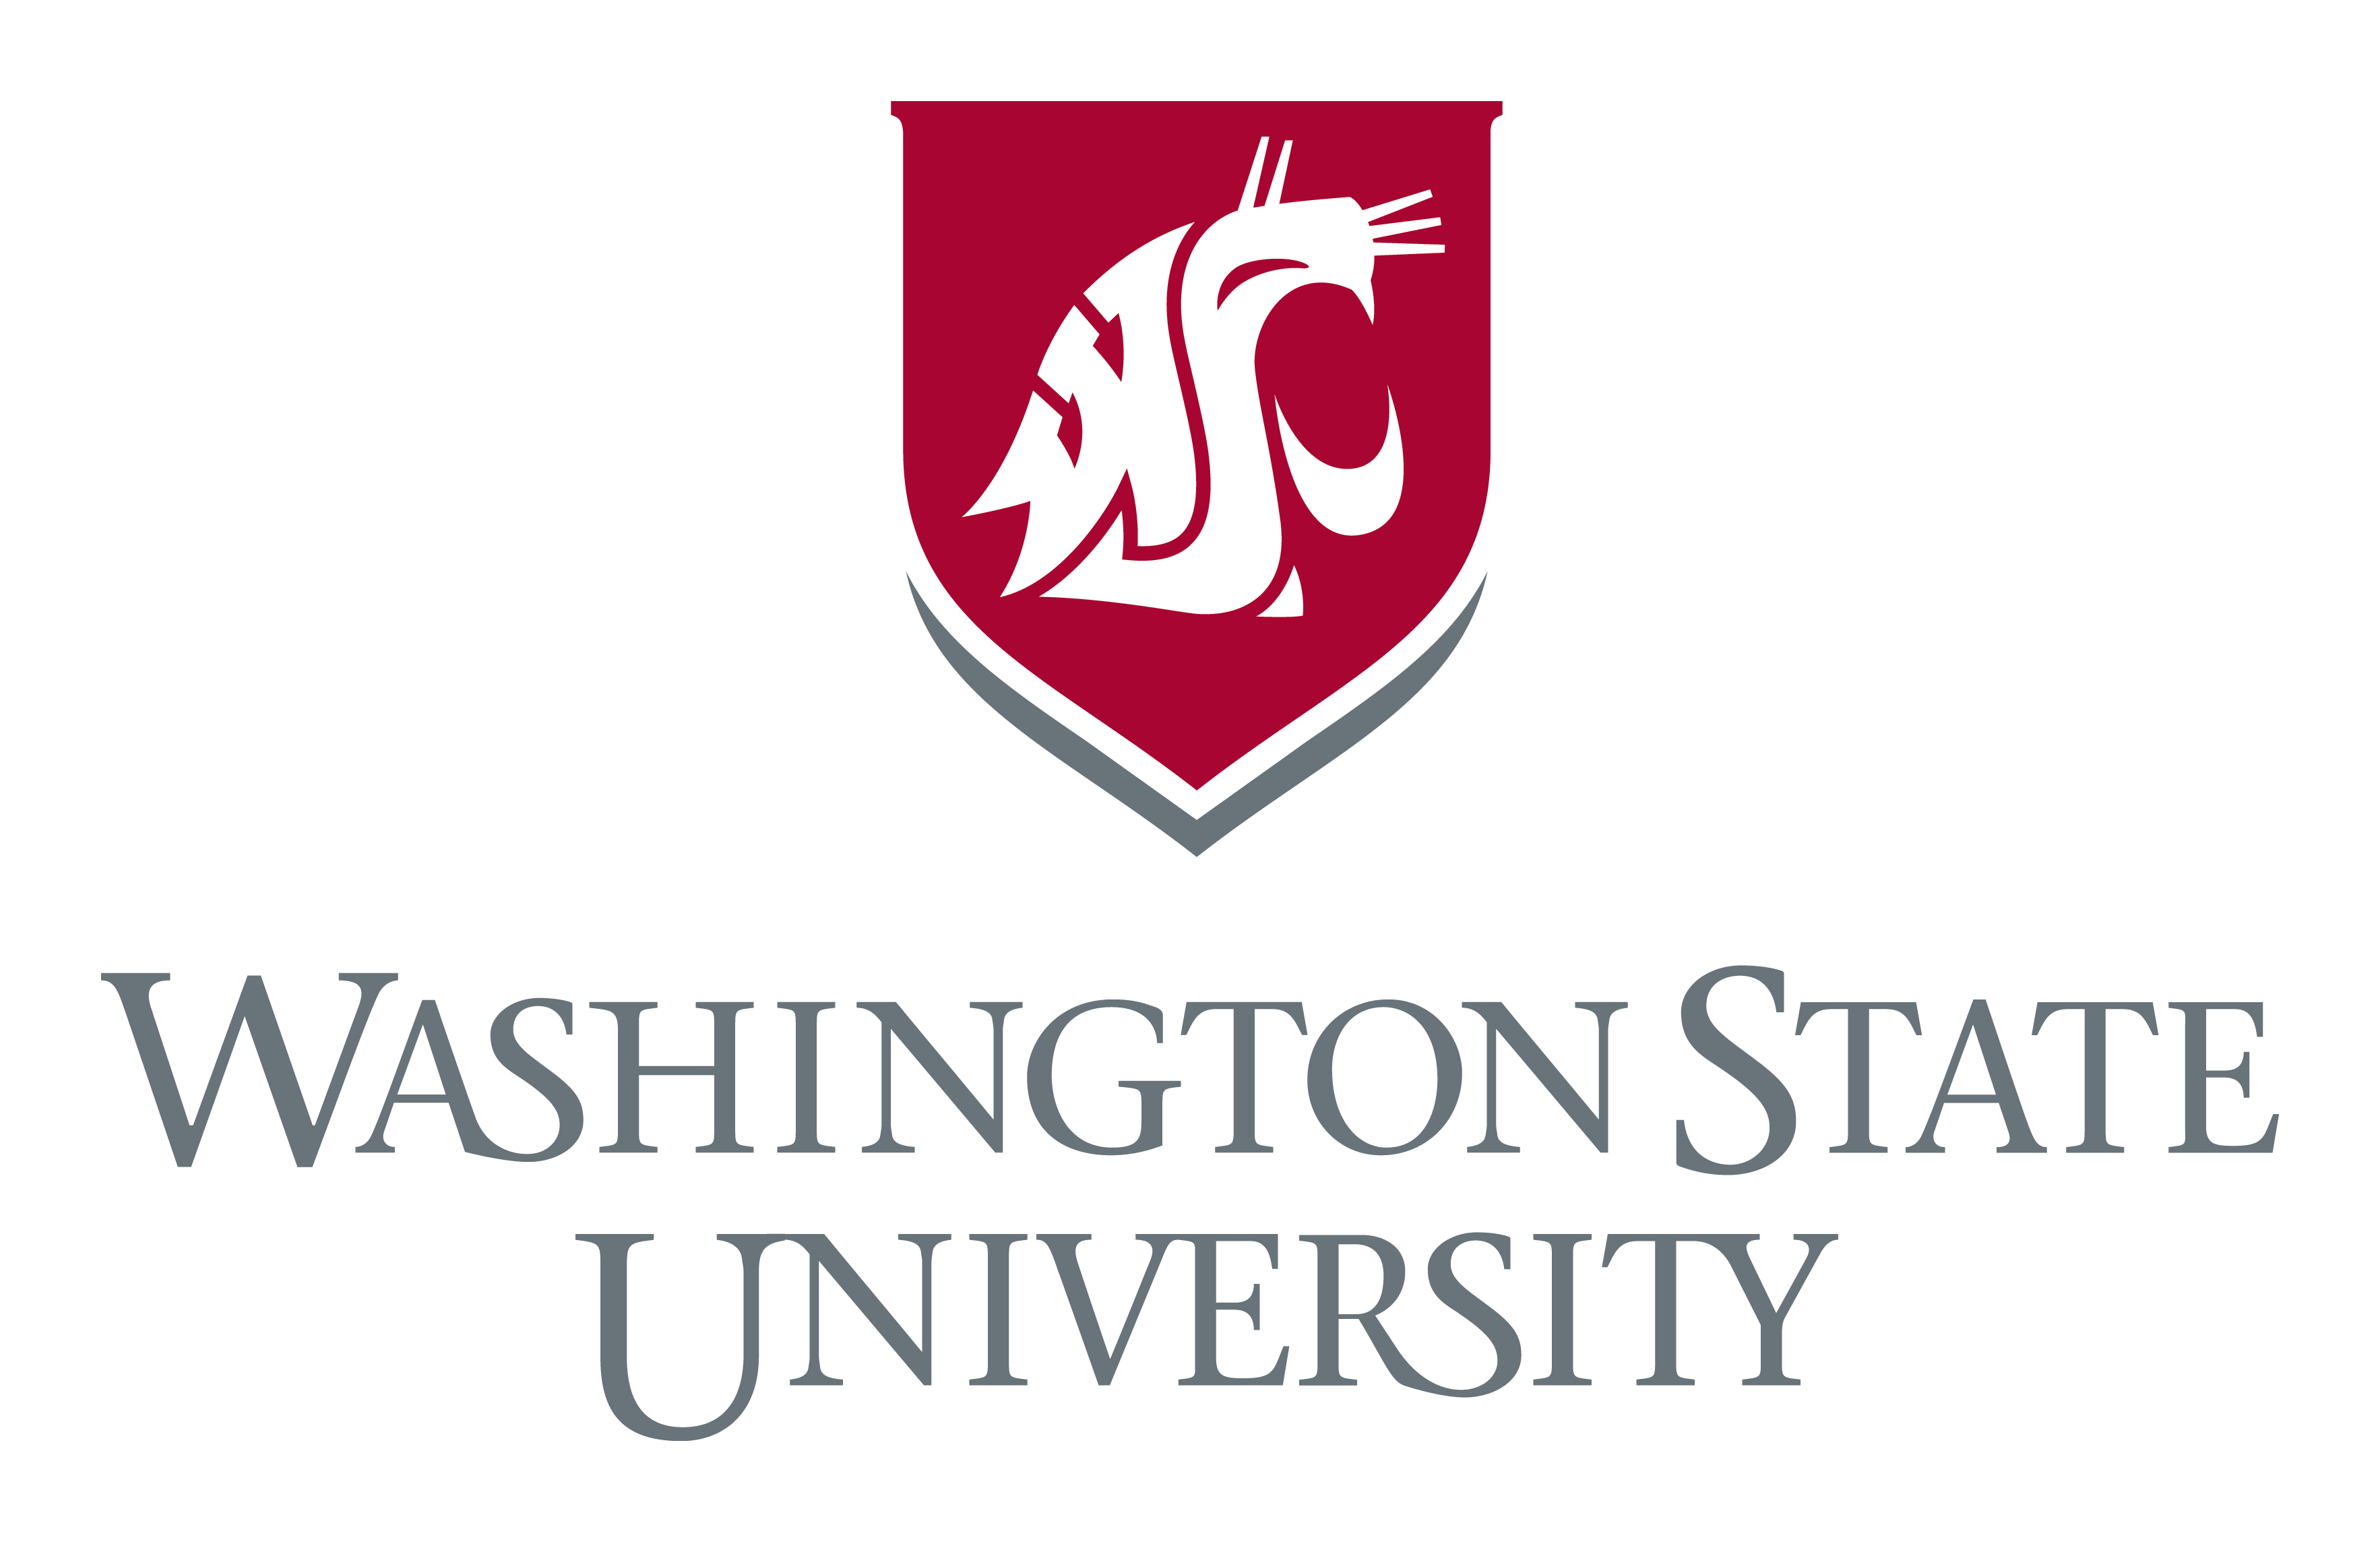 Press Release: Washington State University Increases Vegan Options for Students and Staff